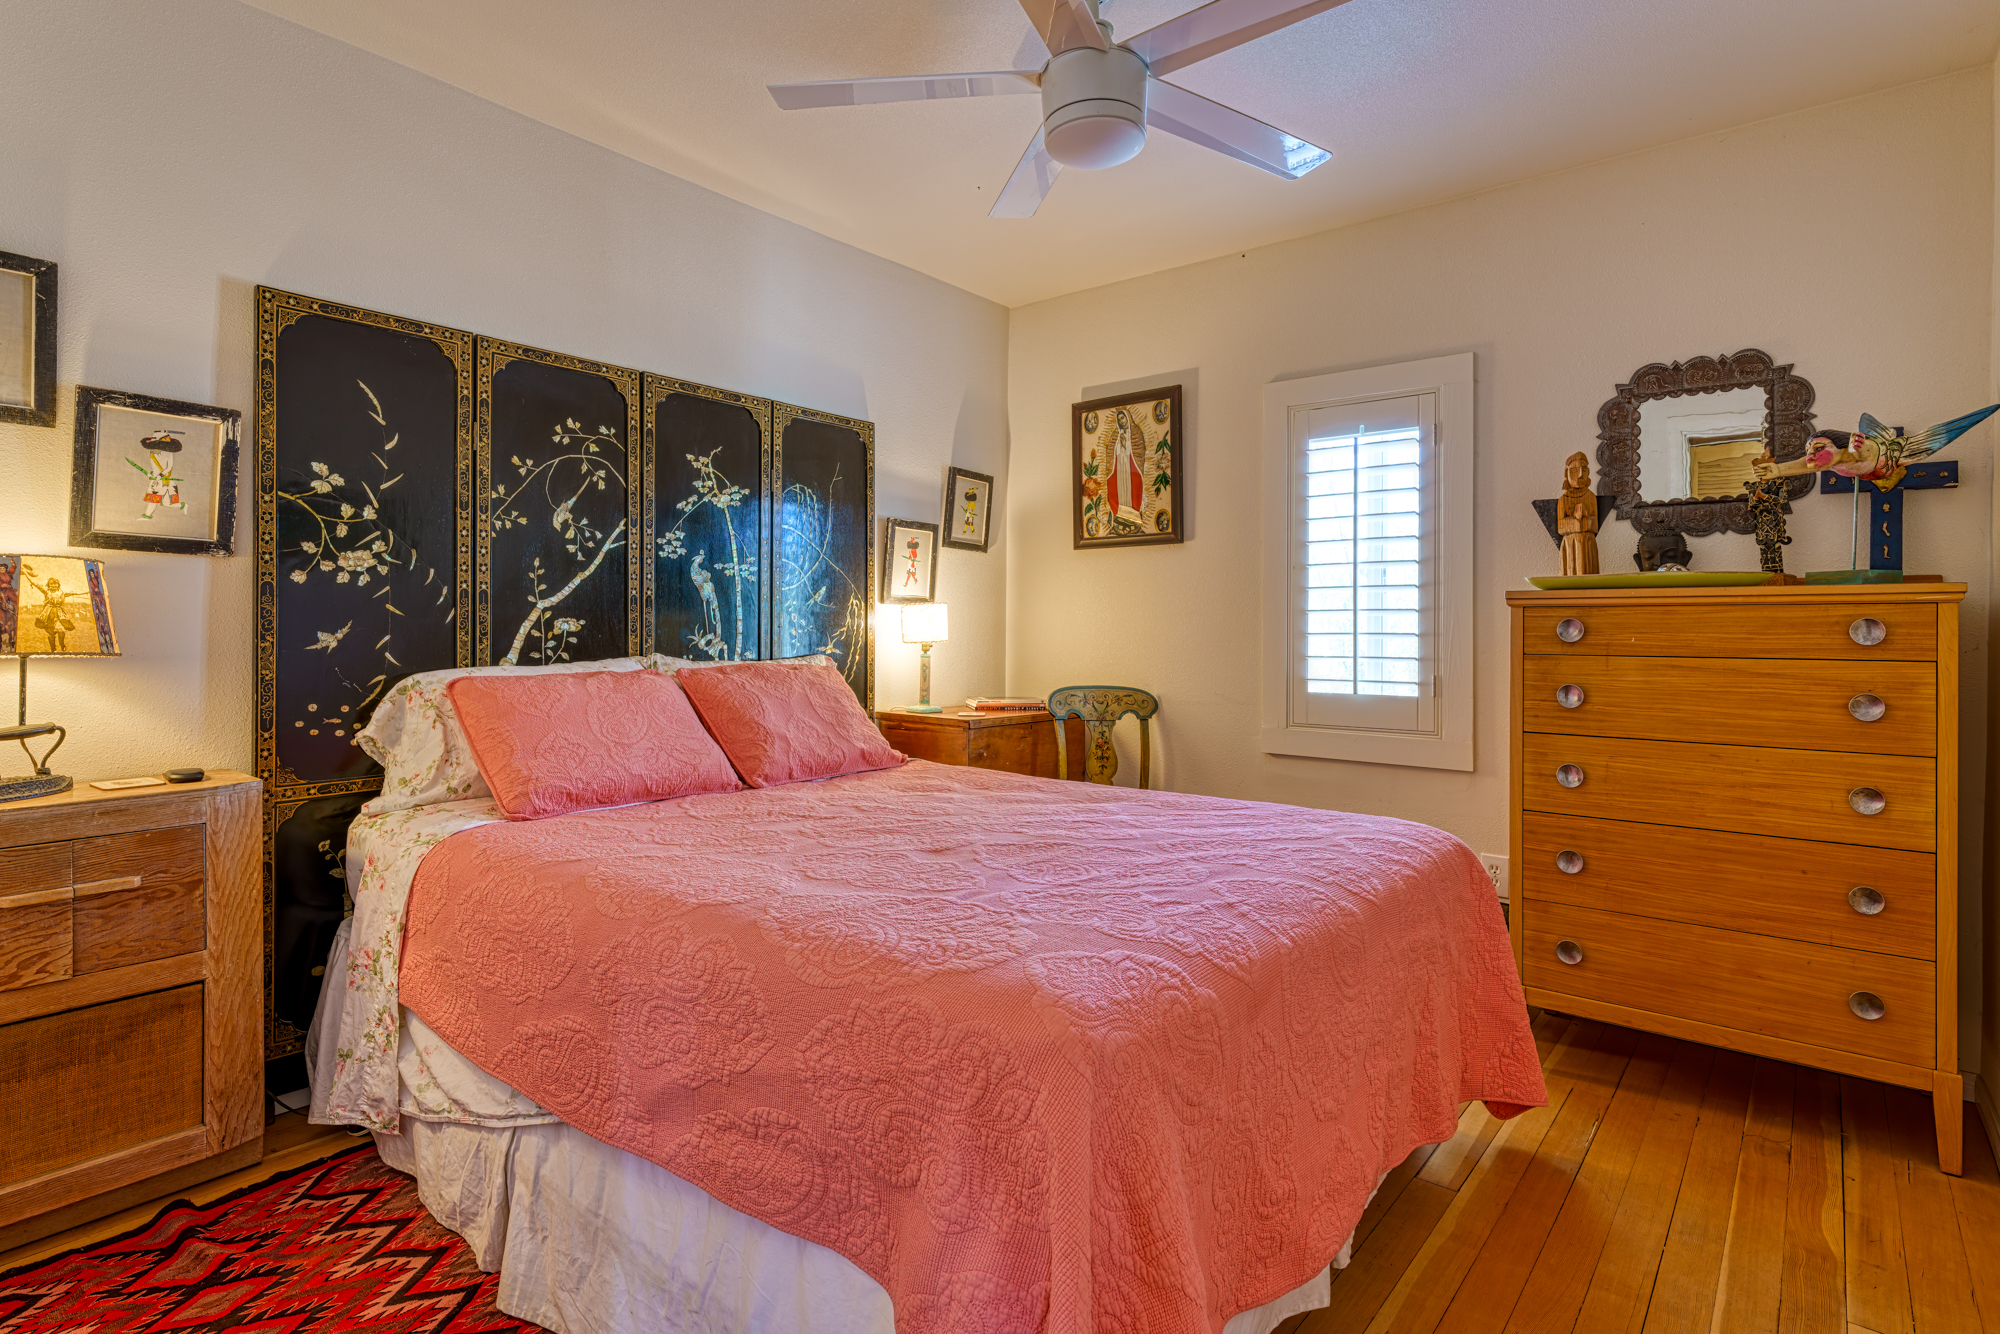 Main bedroom containing a large bed with medium sized wardrobe that has various memorabilia on top of it, two nightstands, a single chair to the right of the bed, various painting and decor hanged from the walls, a rug, and a ceiling fan in the center of the ceiling.